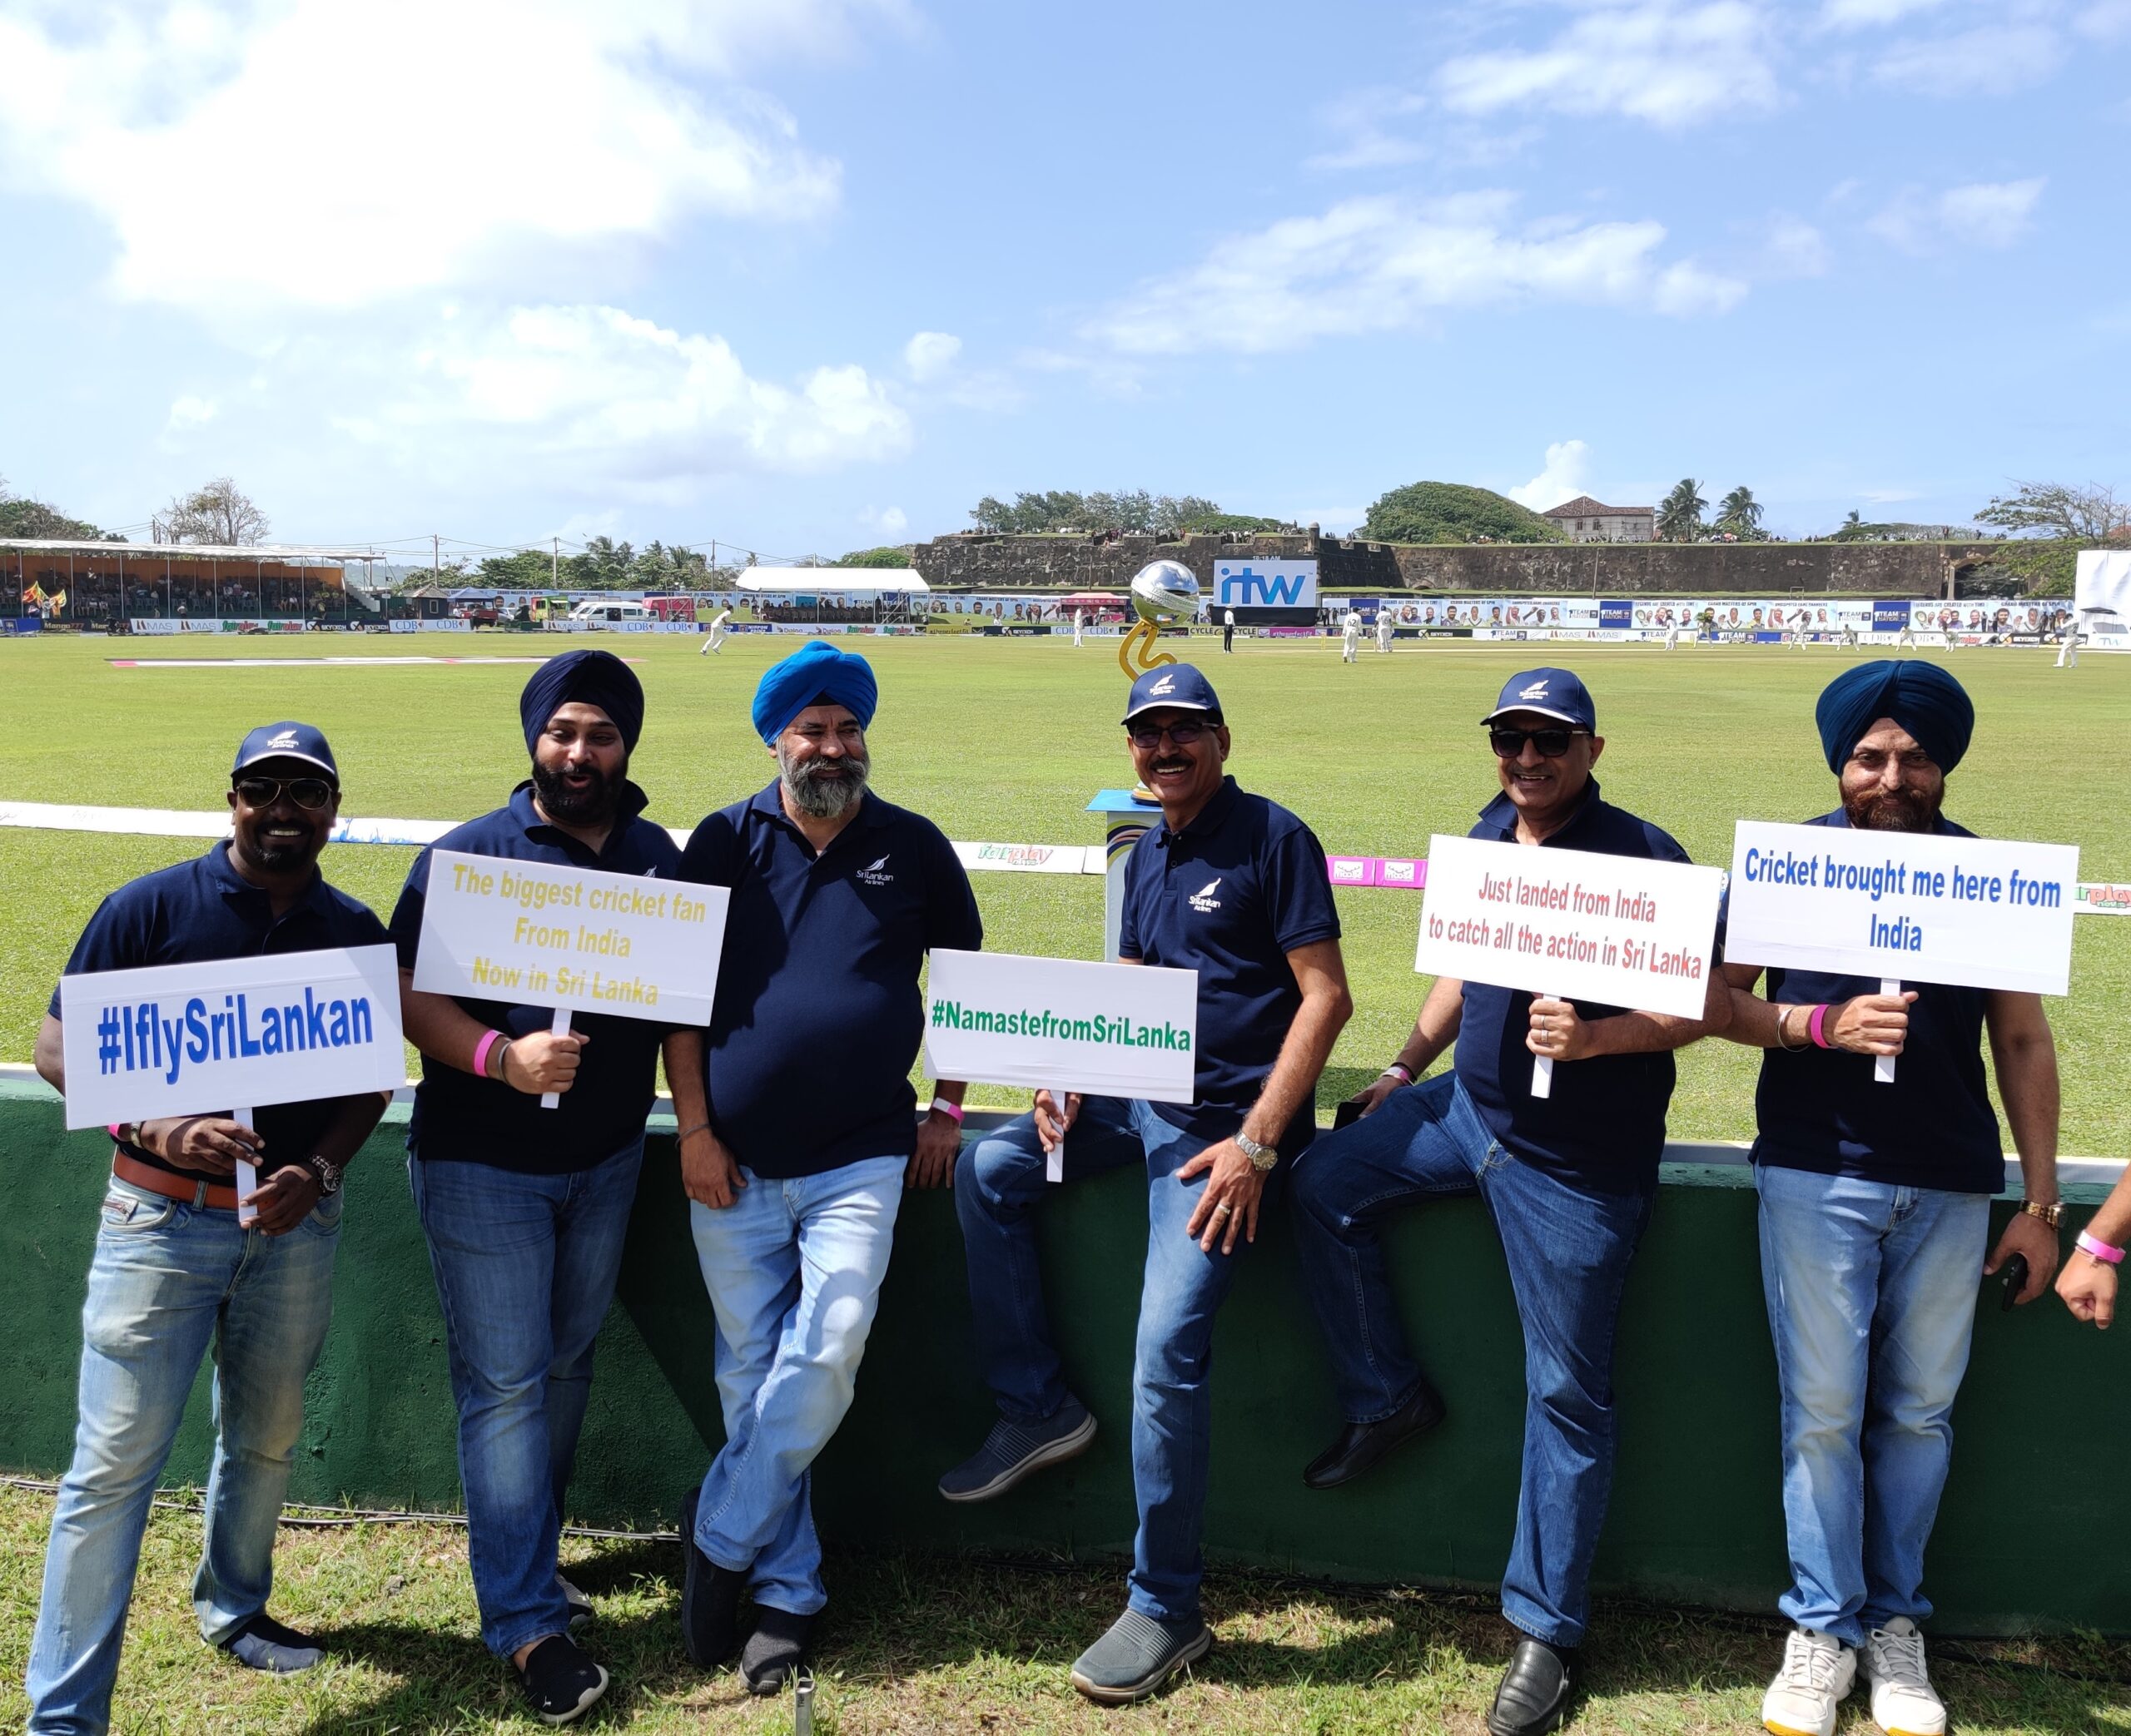 Sri Lankan Airlines, the national airline of Sri Lanka and member of the one world airline alliance, recently hosted Indian travel agents and sports influencers to watch the first match of the test series between Sri Lanka and Australia, which was held at the Galle International Cricket Stadium, Sri Lanka.  The visit served as an opportunity to the influencers and agents to witness normalcy in the country and how inbound tourism is flourishing across the island. The tourism industry of Sri Lanka has always been one of the largest sources of foreign revenue for the country. It has been no secret that the country is currently passing through the most difficult time in its recent history due to the ongoing economic crisis just after the COVID 19 pandemic which had previously destructed tourism in the country.  In order to inspire travellers across India which is the Airline’s single largest source market and also to reassure that Sri Lanka is welcoming and safe, the Airline took this initiative whereby inviting the tourists arriving in Sri Lanka to make the most of this much sought-after tourist paradise – with high exchange rates and great travel offers.  Ever since the easing of travel restrictions following the global pandemic, Sri Lankan Airlines has steered an extensive content creator campaign #NamastefromSriLanka, in order to build advocacy and familiarity to the brand Sri Lankan Airlines and destination Sri Lanka. Under this programme, Sri Lanka has welcomed over 60 content creators and social influencers from India so far, and the agents’ fam tour is another extension of this initiative.  SriLankan Airlines, Chief Executive Officer, Mr. Richard Nuttall met the group at a fellowship and dinner where he spoke his sentiments; “We believe that Sri Lanka holds a timeless appeal to the discerning Indian traveller; whether you are travelling solo or with family; or whether you are a seasoned repeater or a first-timer. During these challenging times, I firmly believe that the India Market will be largely helpful in our bounce back efforts. I am confident that our long-standing affinity with the Indian travel trade partners will pave the way for fruitful results in the days to come.”  Sports blogger/ social influencer, Nashpreet Singh said, “Despite all that the country is going through, it is perfect for tourists. The people were nothing but welcoming and friendly, I am in awe of the resilience they have shown during these tough times. Sri Lanka is completely fine to visit. This was my second trip this year. It is a beautiful country with the friendliest people and the most delicious food.”  Hospitality Partners, Cinnamon Grand Colombo, Radisson Blu Resort Galle, Cinnamon Bentota Beach, Cinnamon Lakeside Colombo and Malabar Hills Weligama extended their hospitality to the visiting agents. Walkers Tours closely worked with the Airline to curate the itineraries, and manage ground arrangements including hotel transfers.